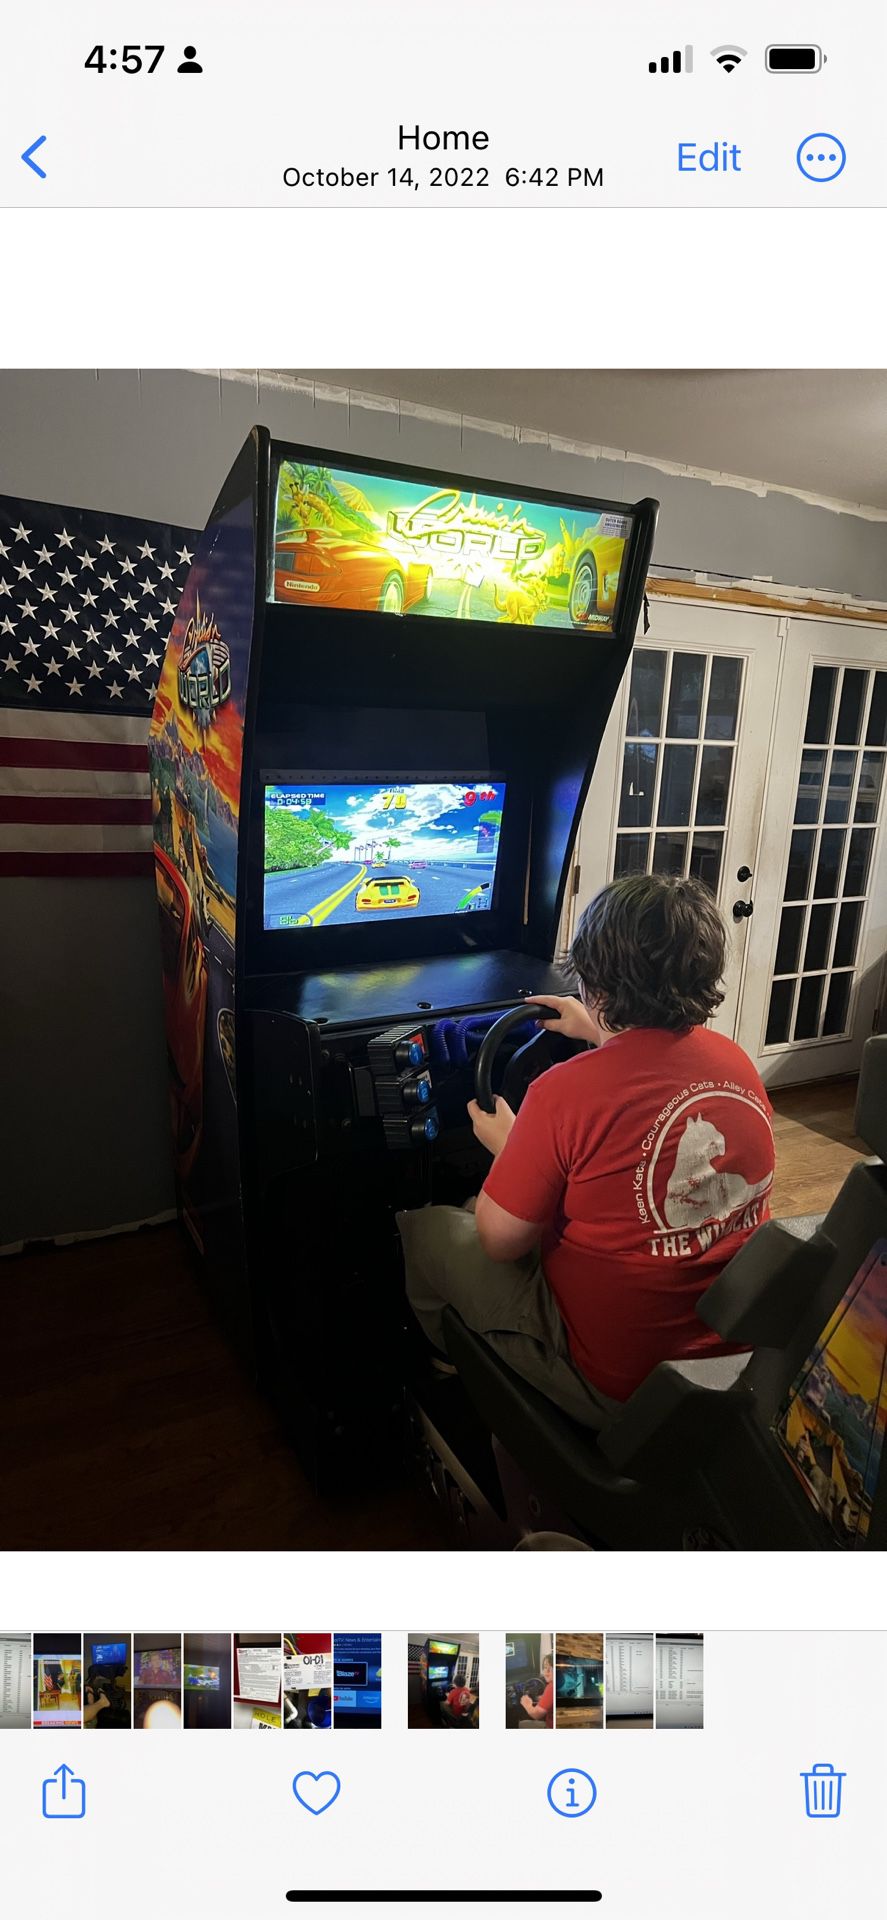 Dual Cruis'n World sit-down Arcade driving games for Sale in Dumfries, VA -  OfferUp